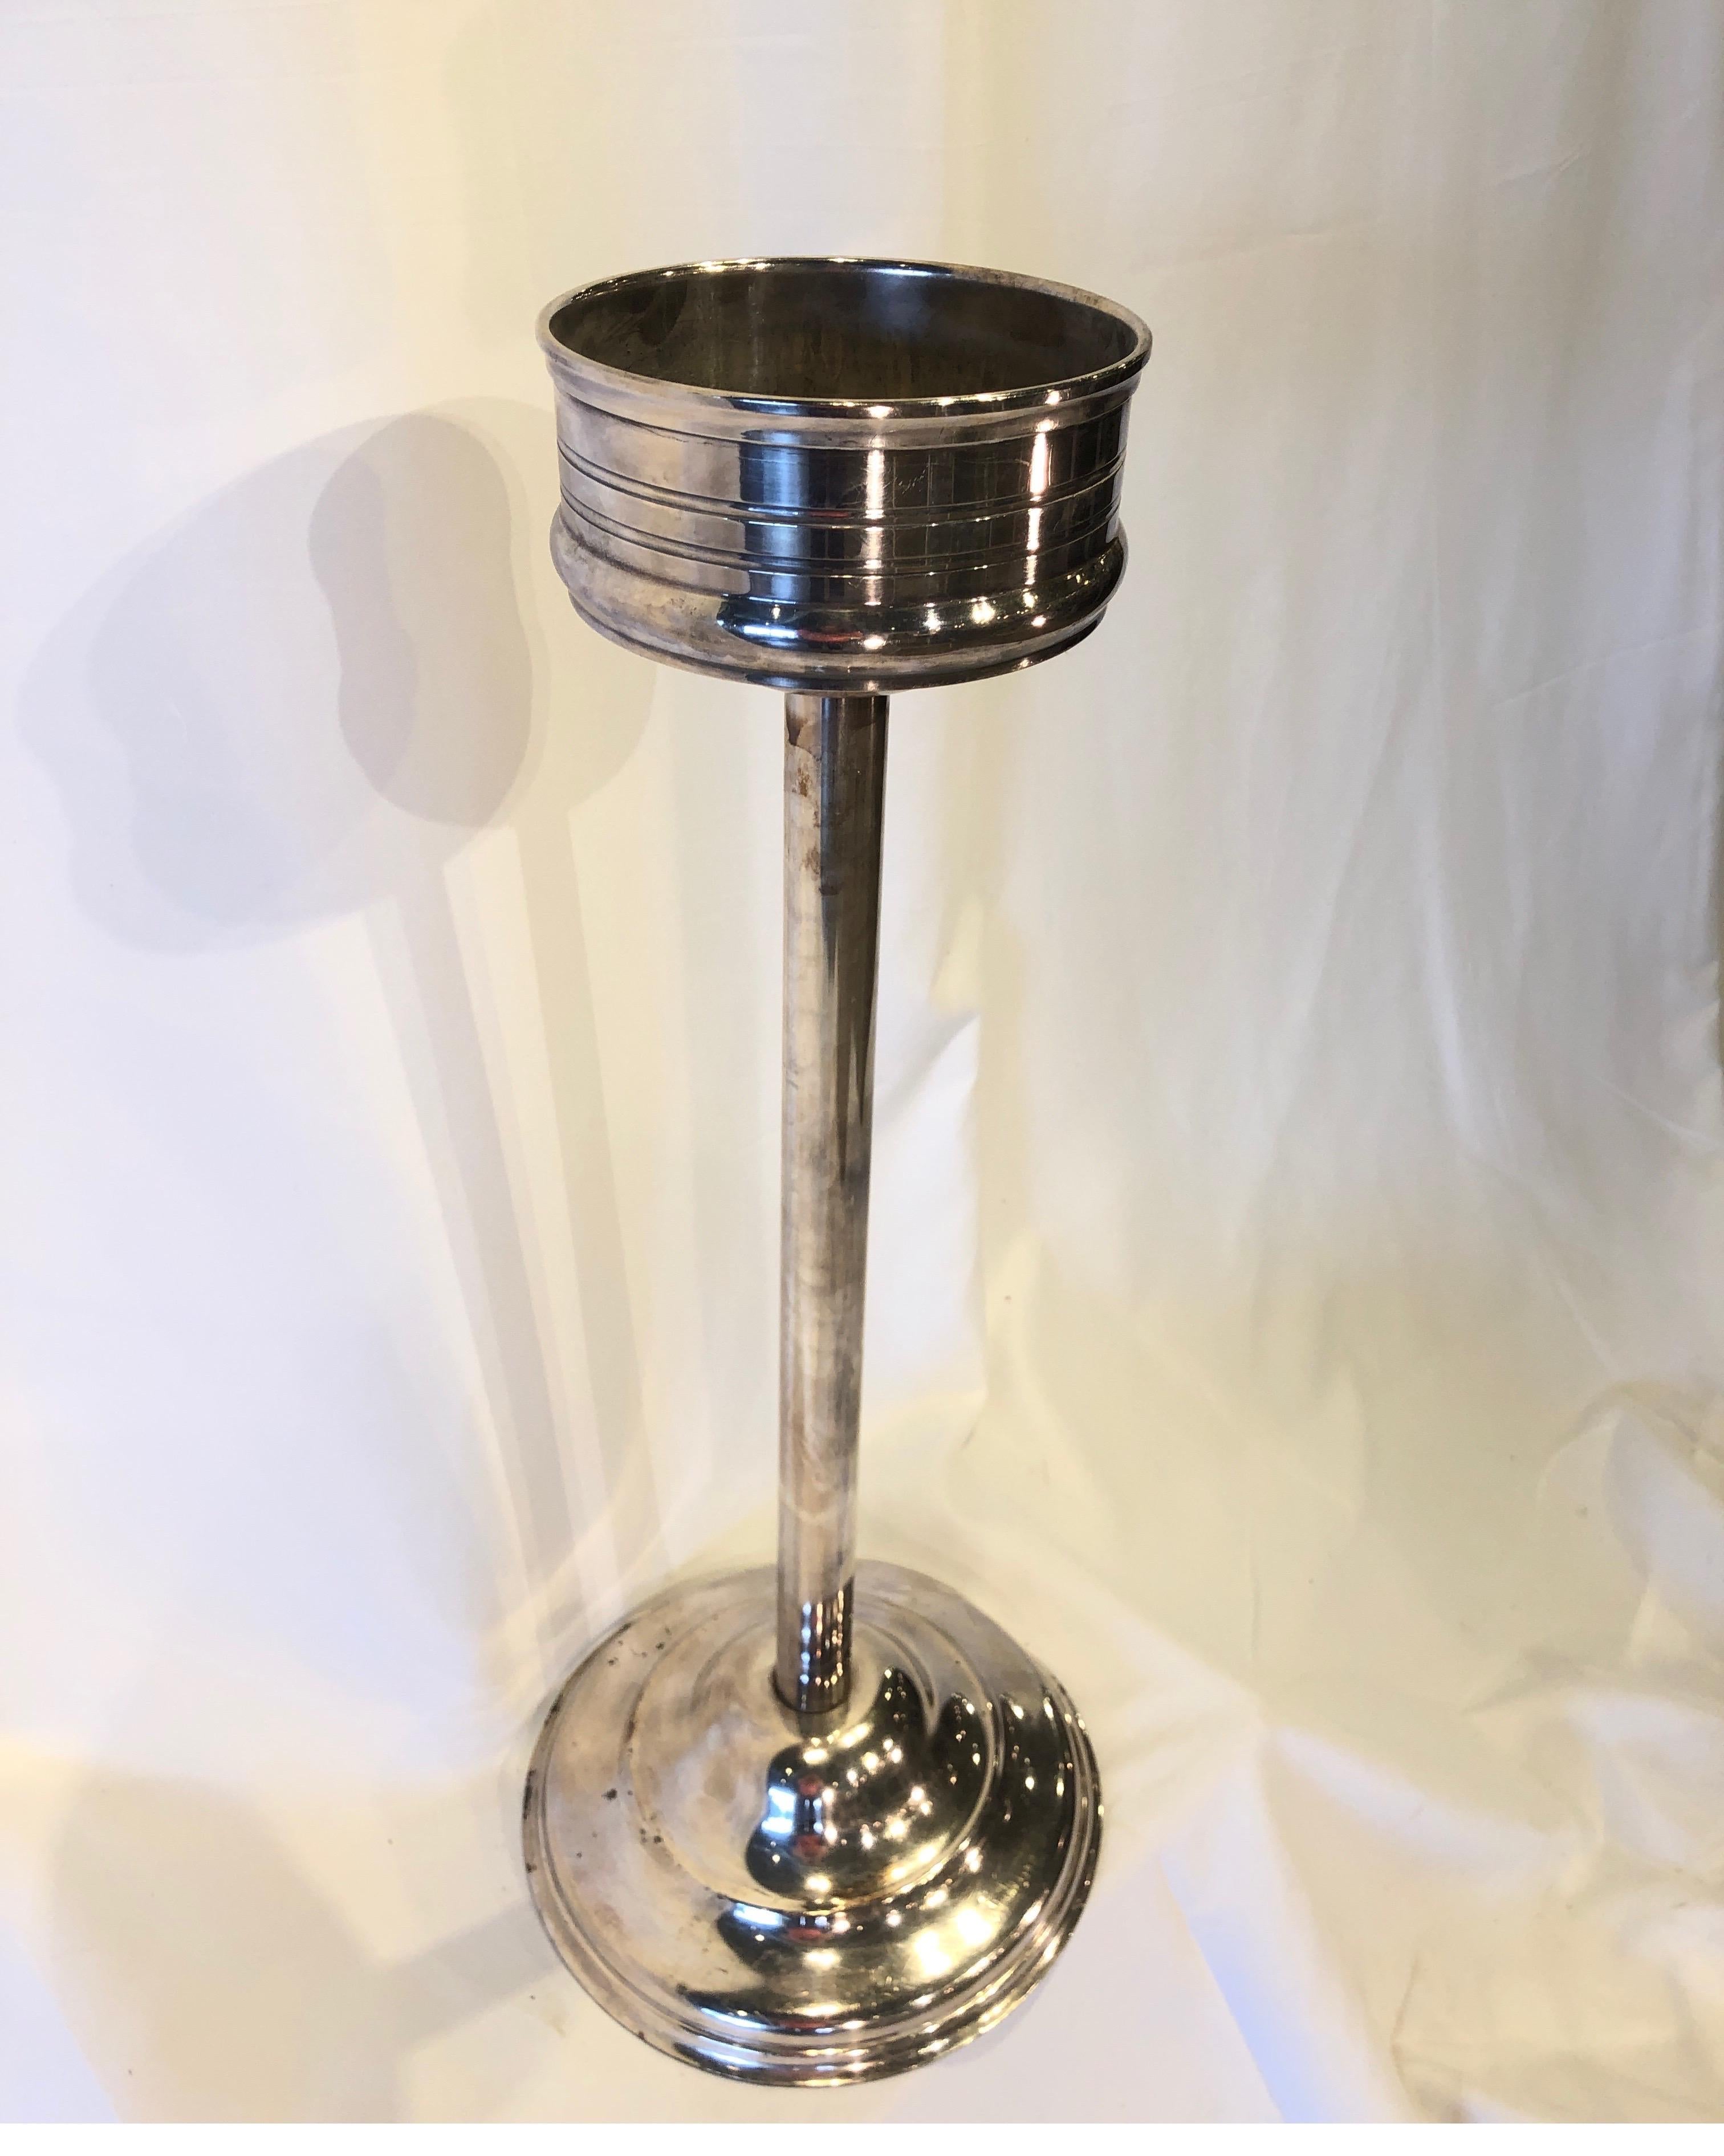 This beautiful French hotel silver champagne stand was originally used in a restaurant to hold a cooler and bottle of wine or champagne. The stand is 27.25 inches in height, 7 inch diameter top and has a 10.75 inch diameter weighted base. A